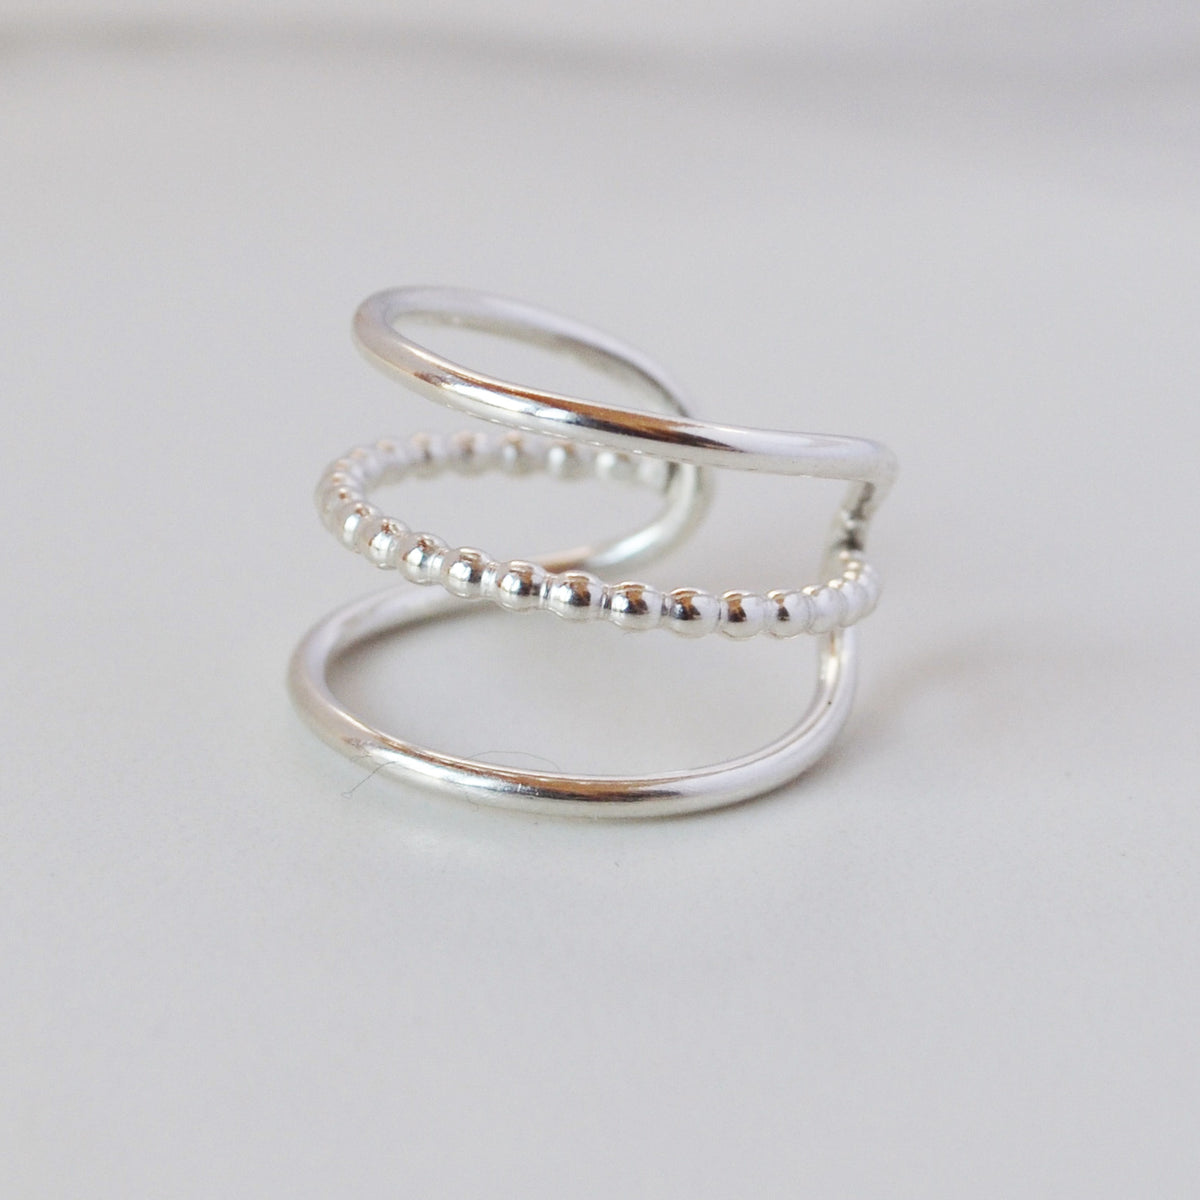 Bead Between the Lines Ring, Gold or Silver